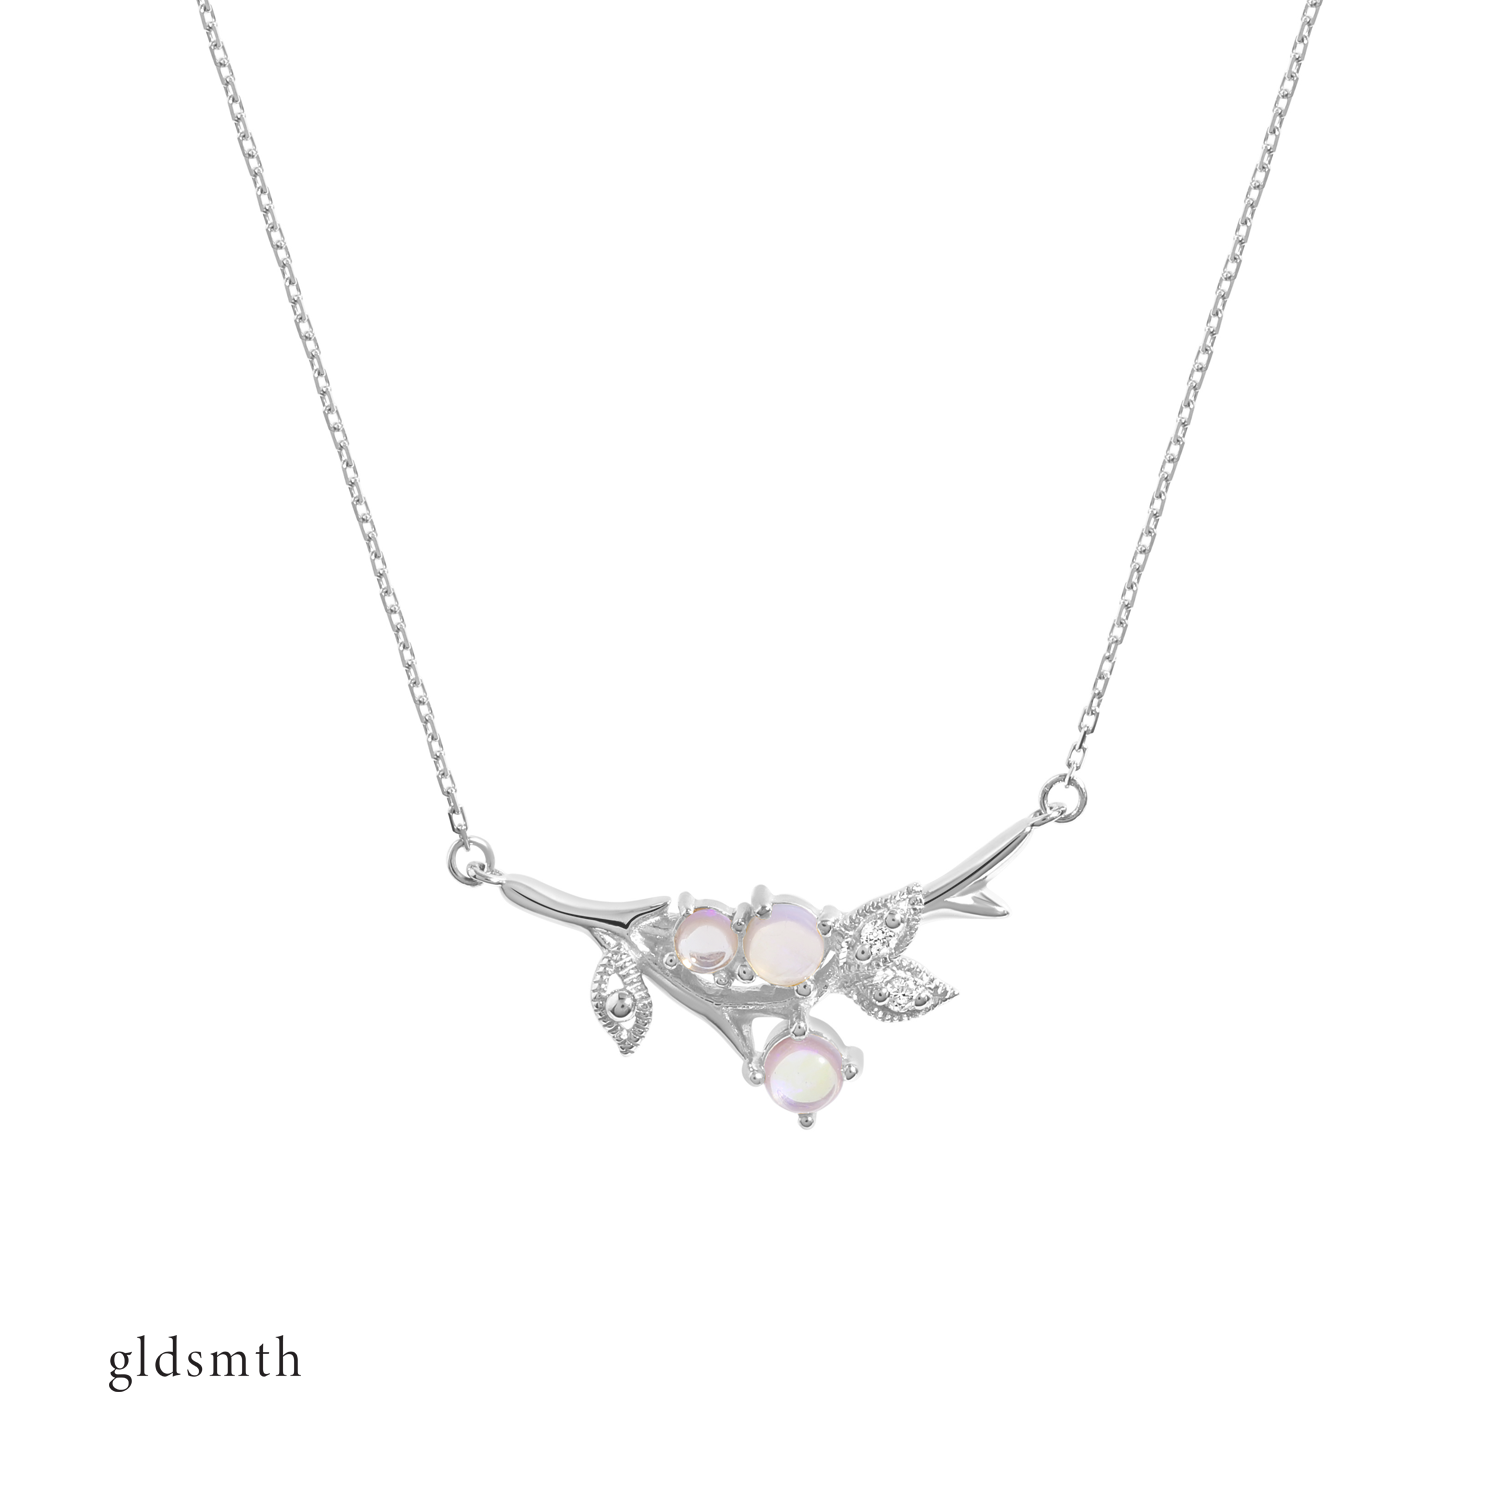 Dainty and fine necklace. Handcrafted 10k solid white gold necklace with conflict-free diamonds and opals.